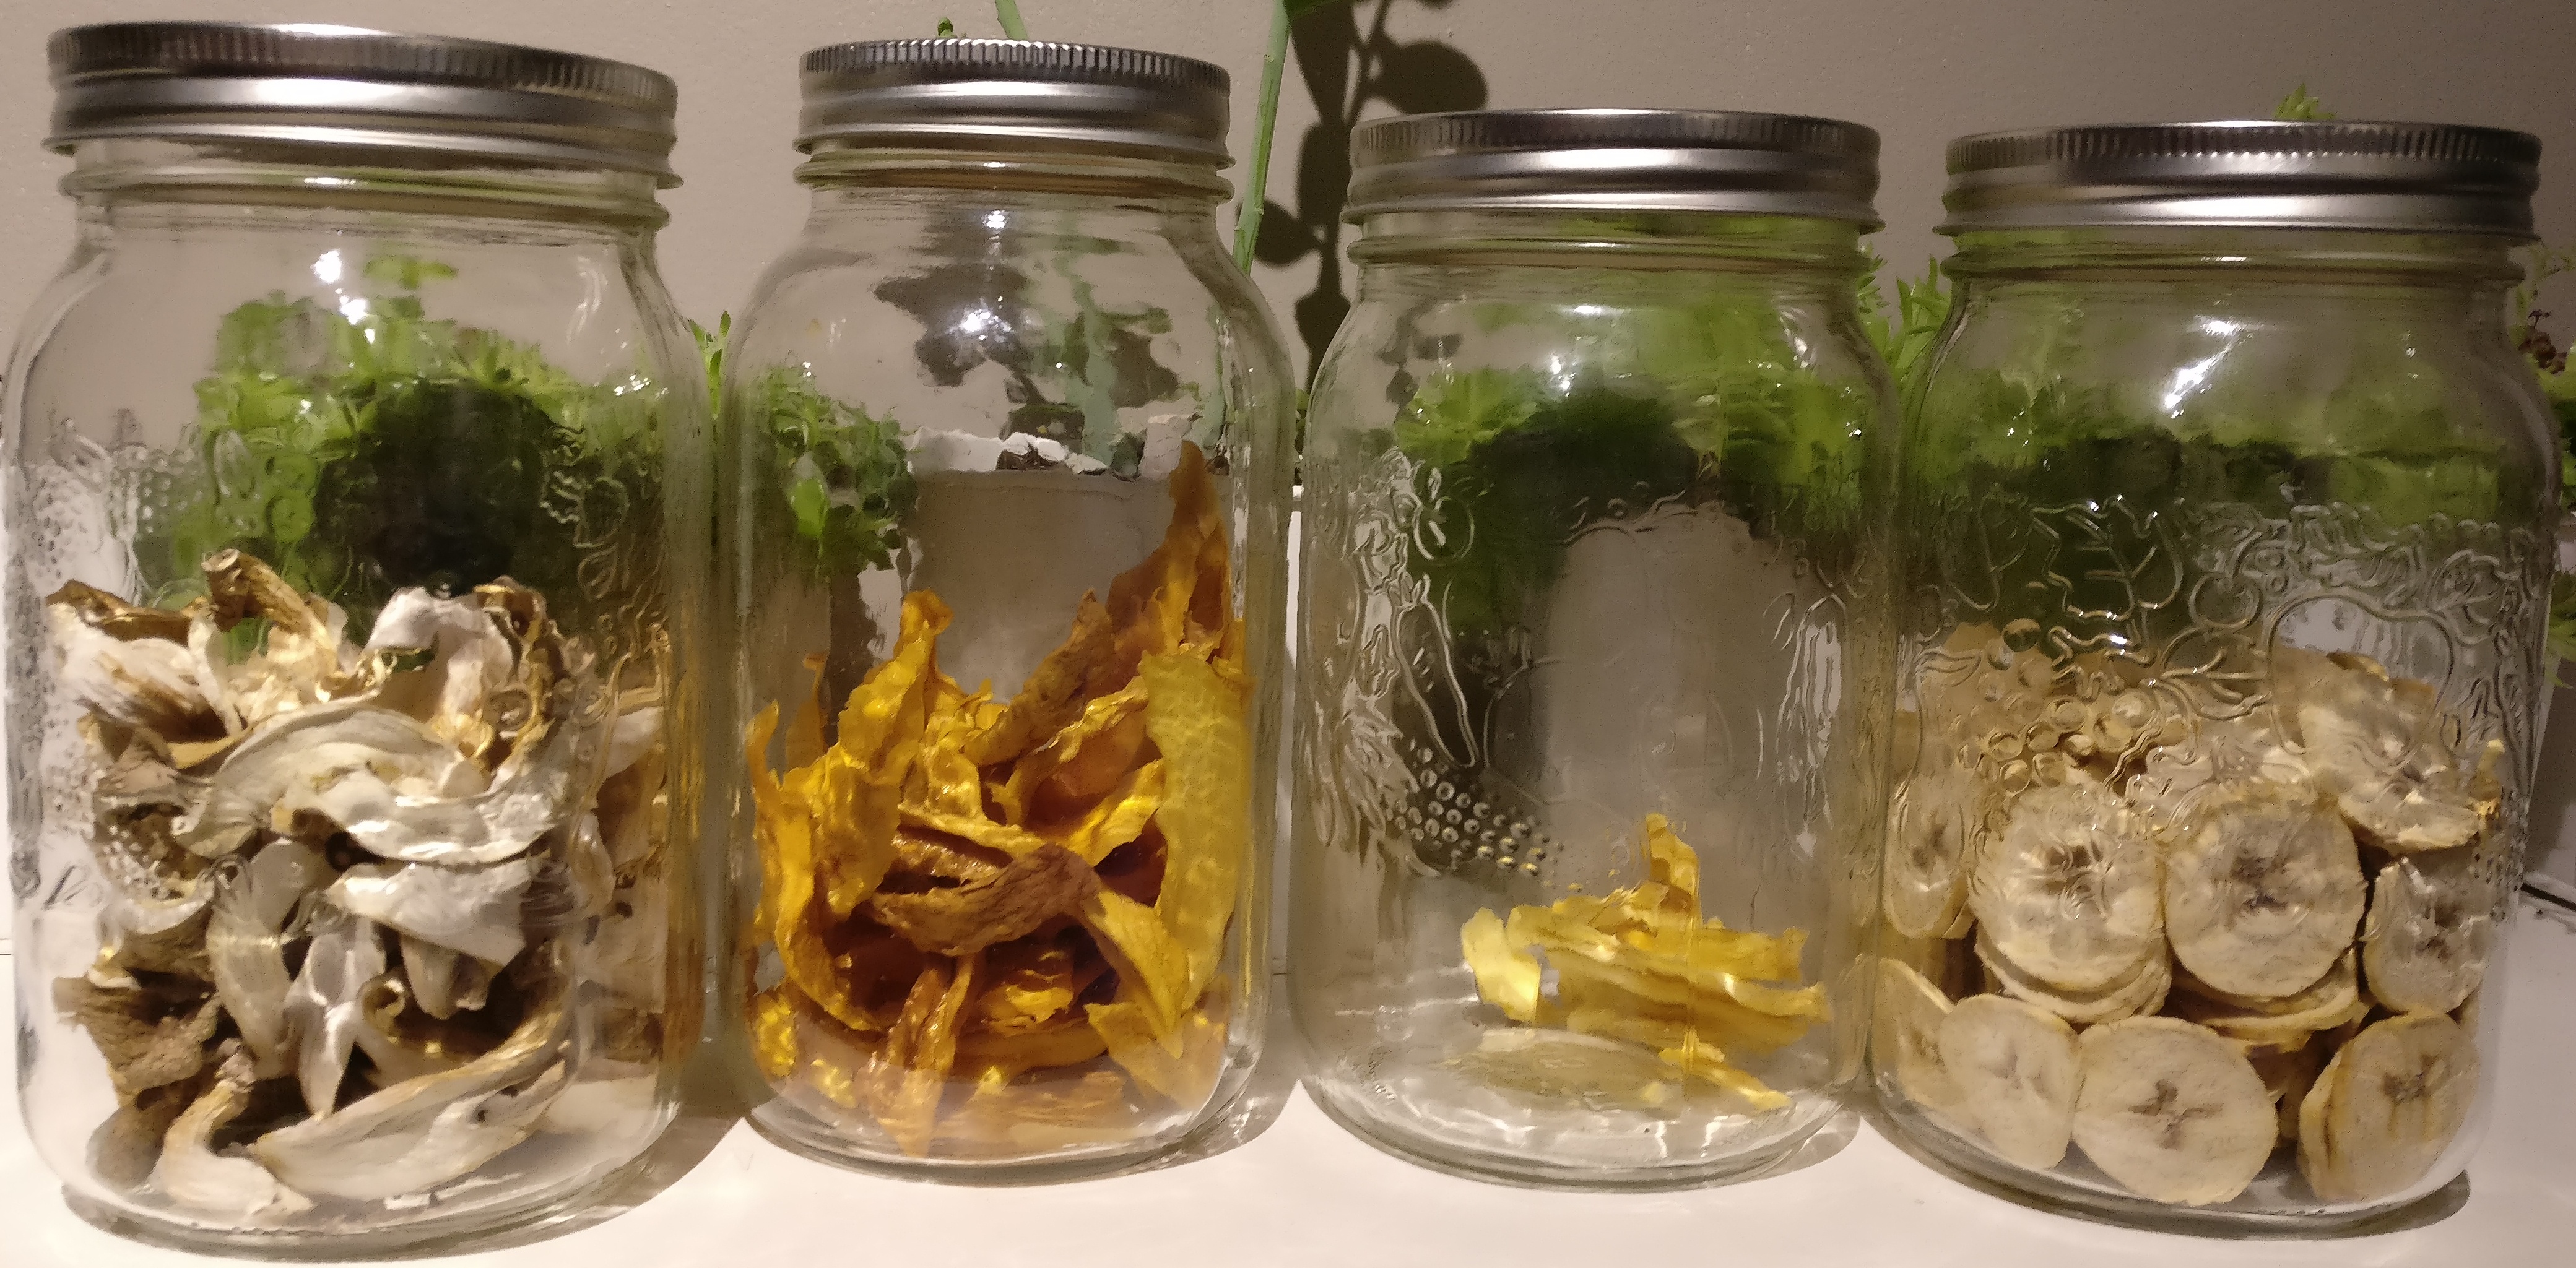 All stored in mason jars